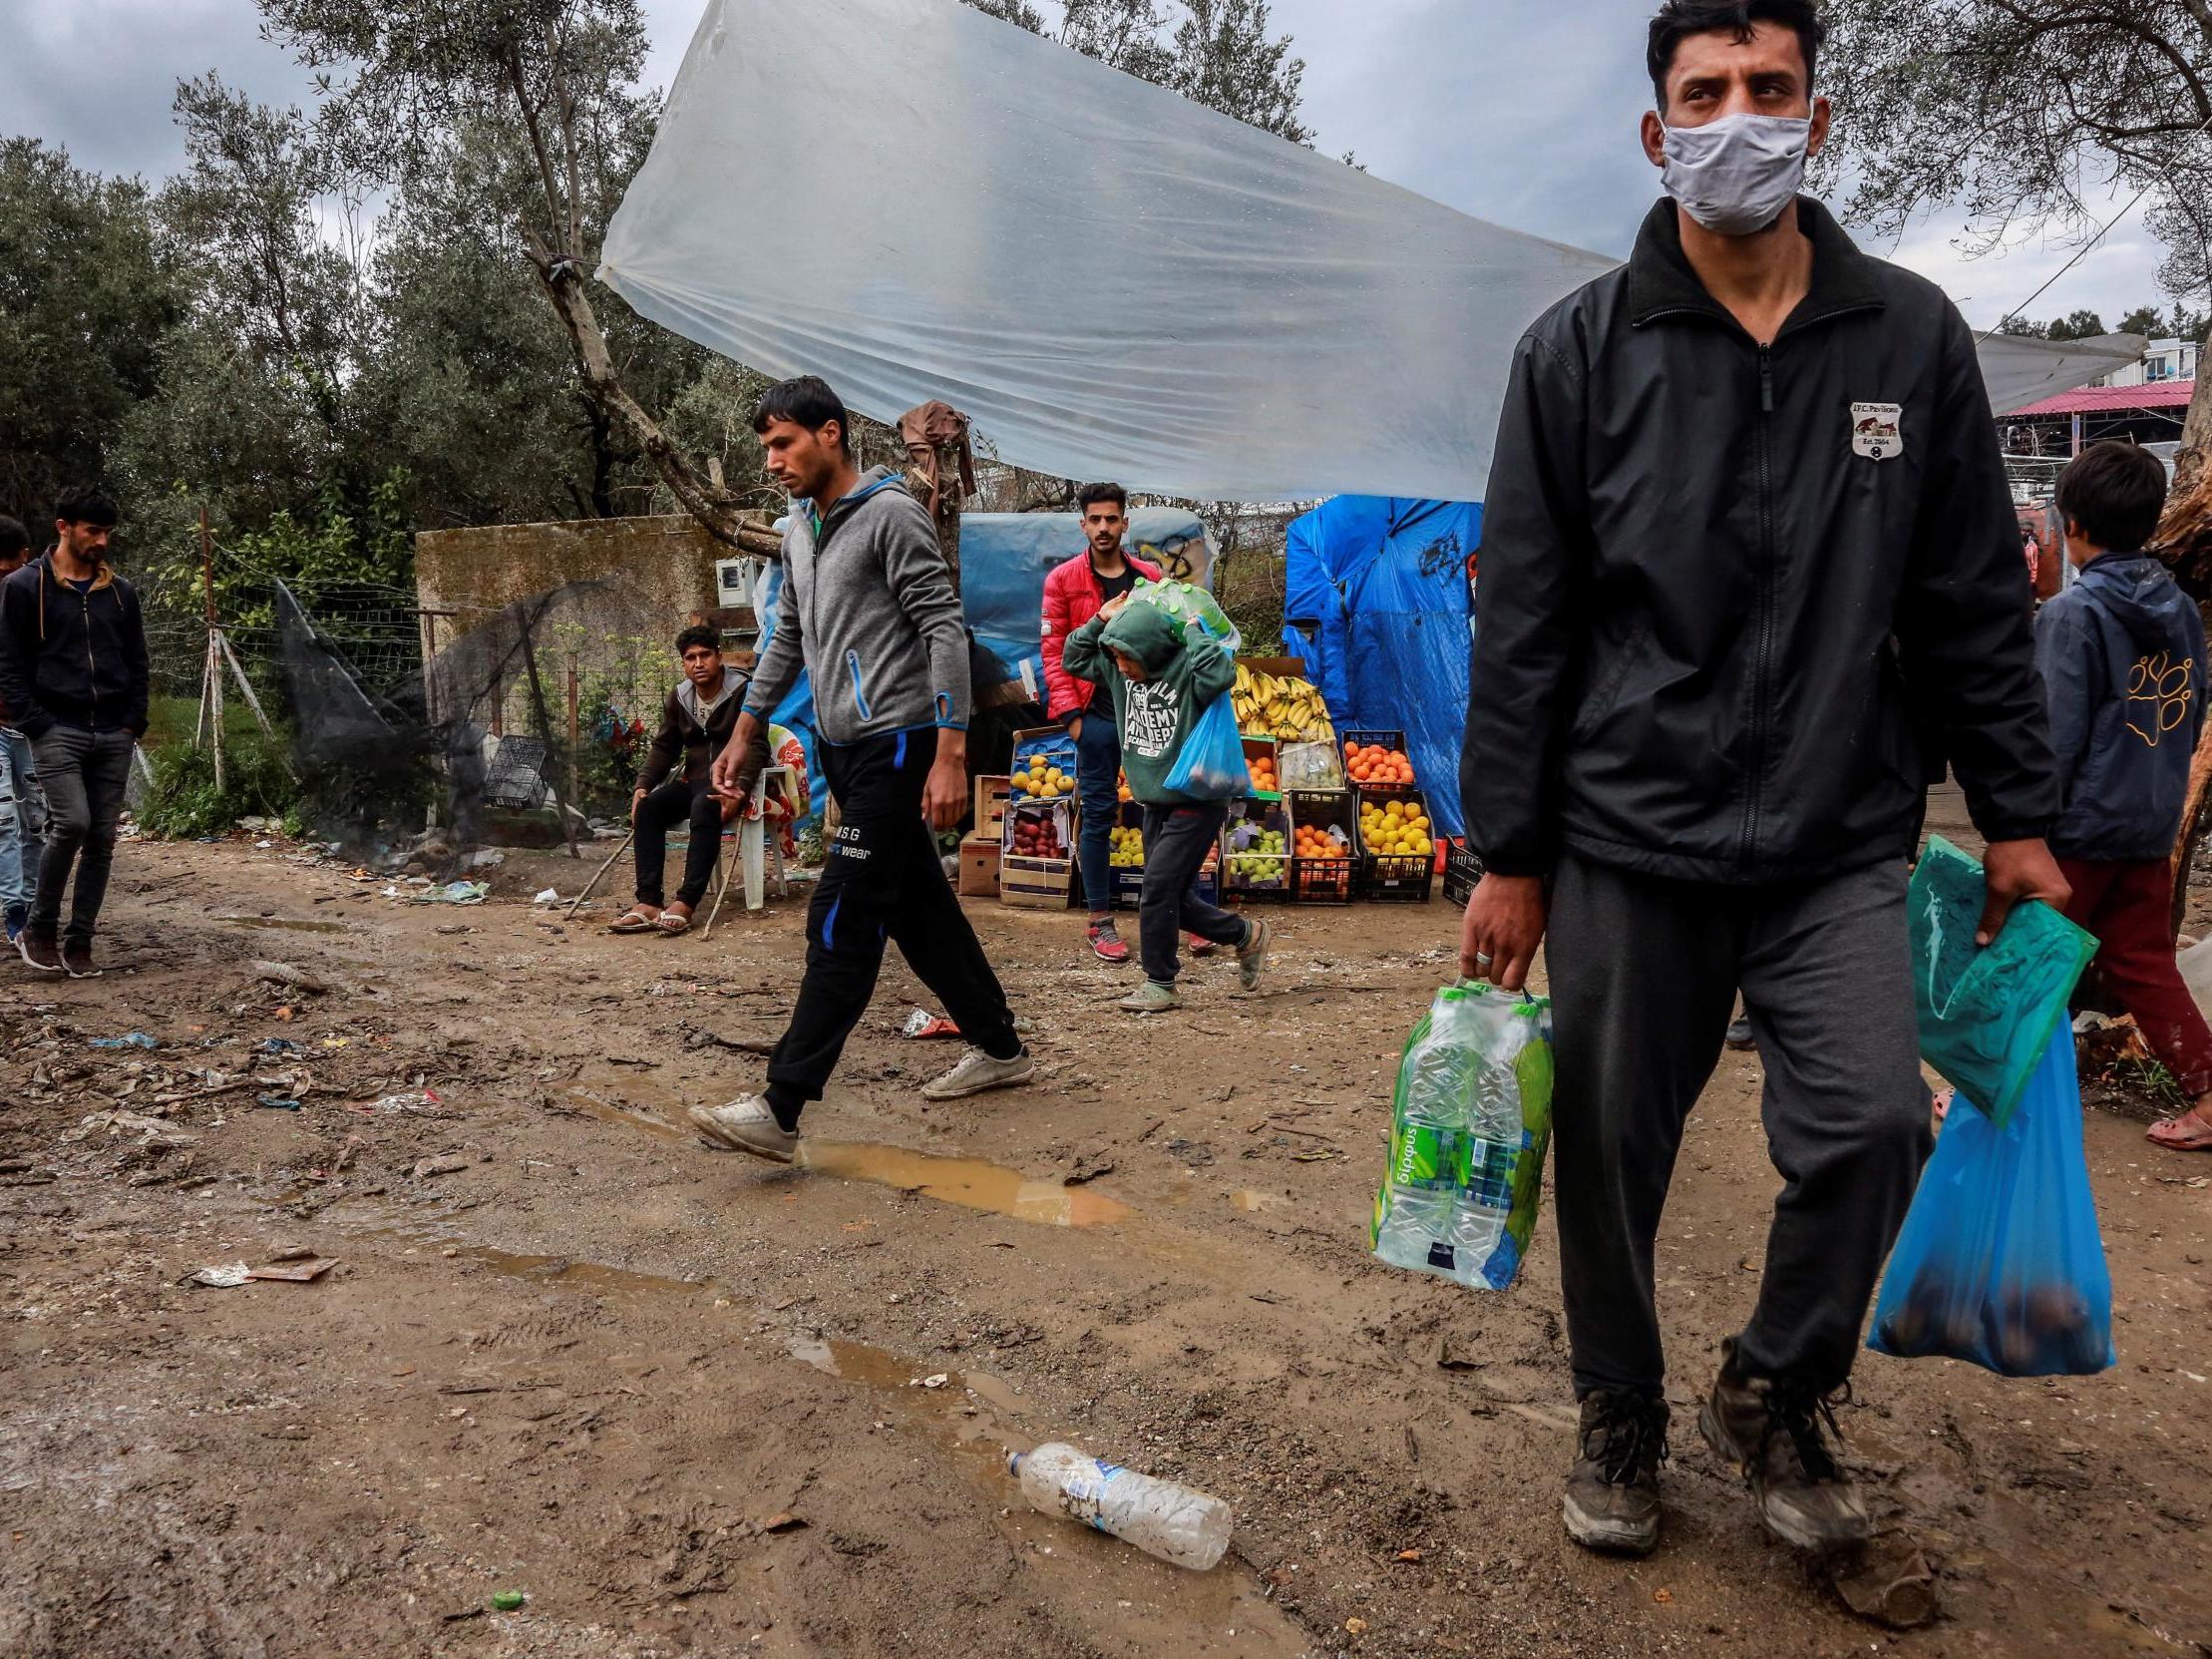 Conditions in the Moria camp are ripe for the rapid transmission of coronavirus, health officials have warned (AFP/Getty)